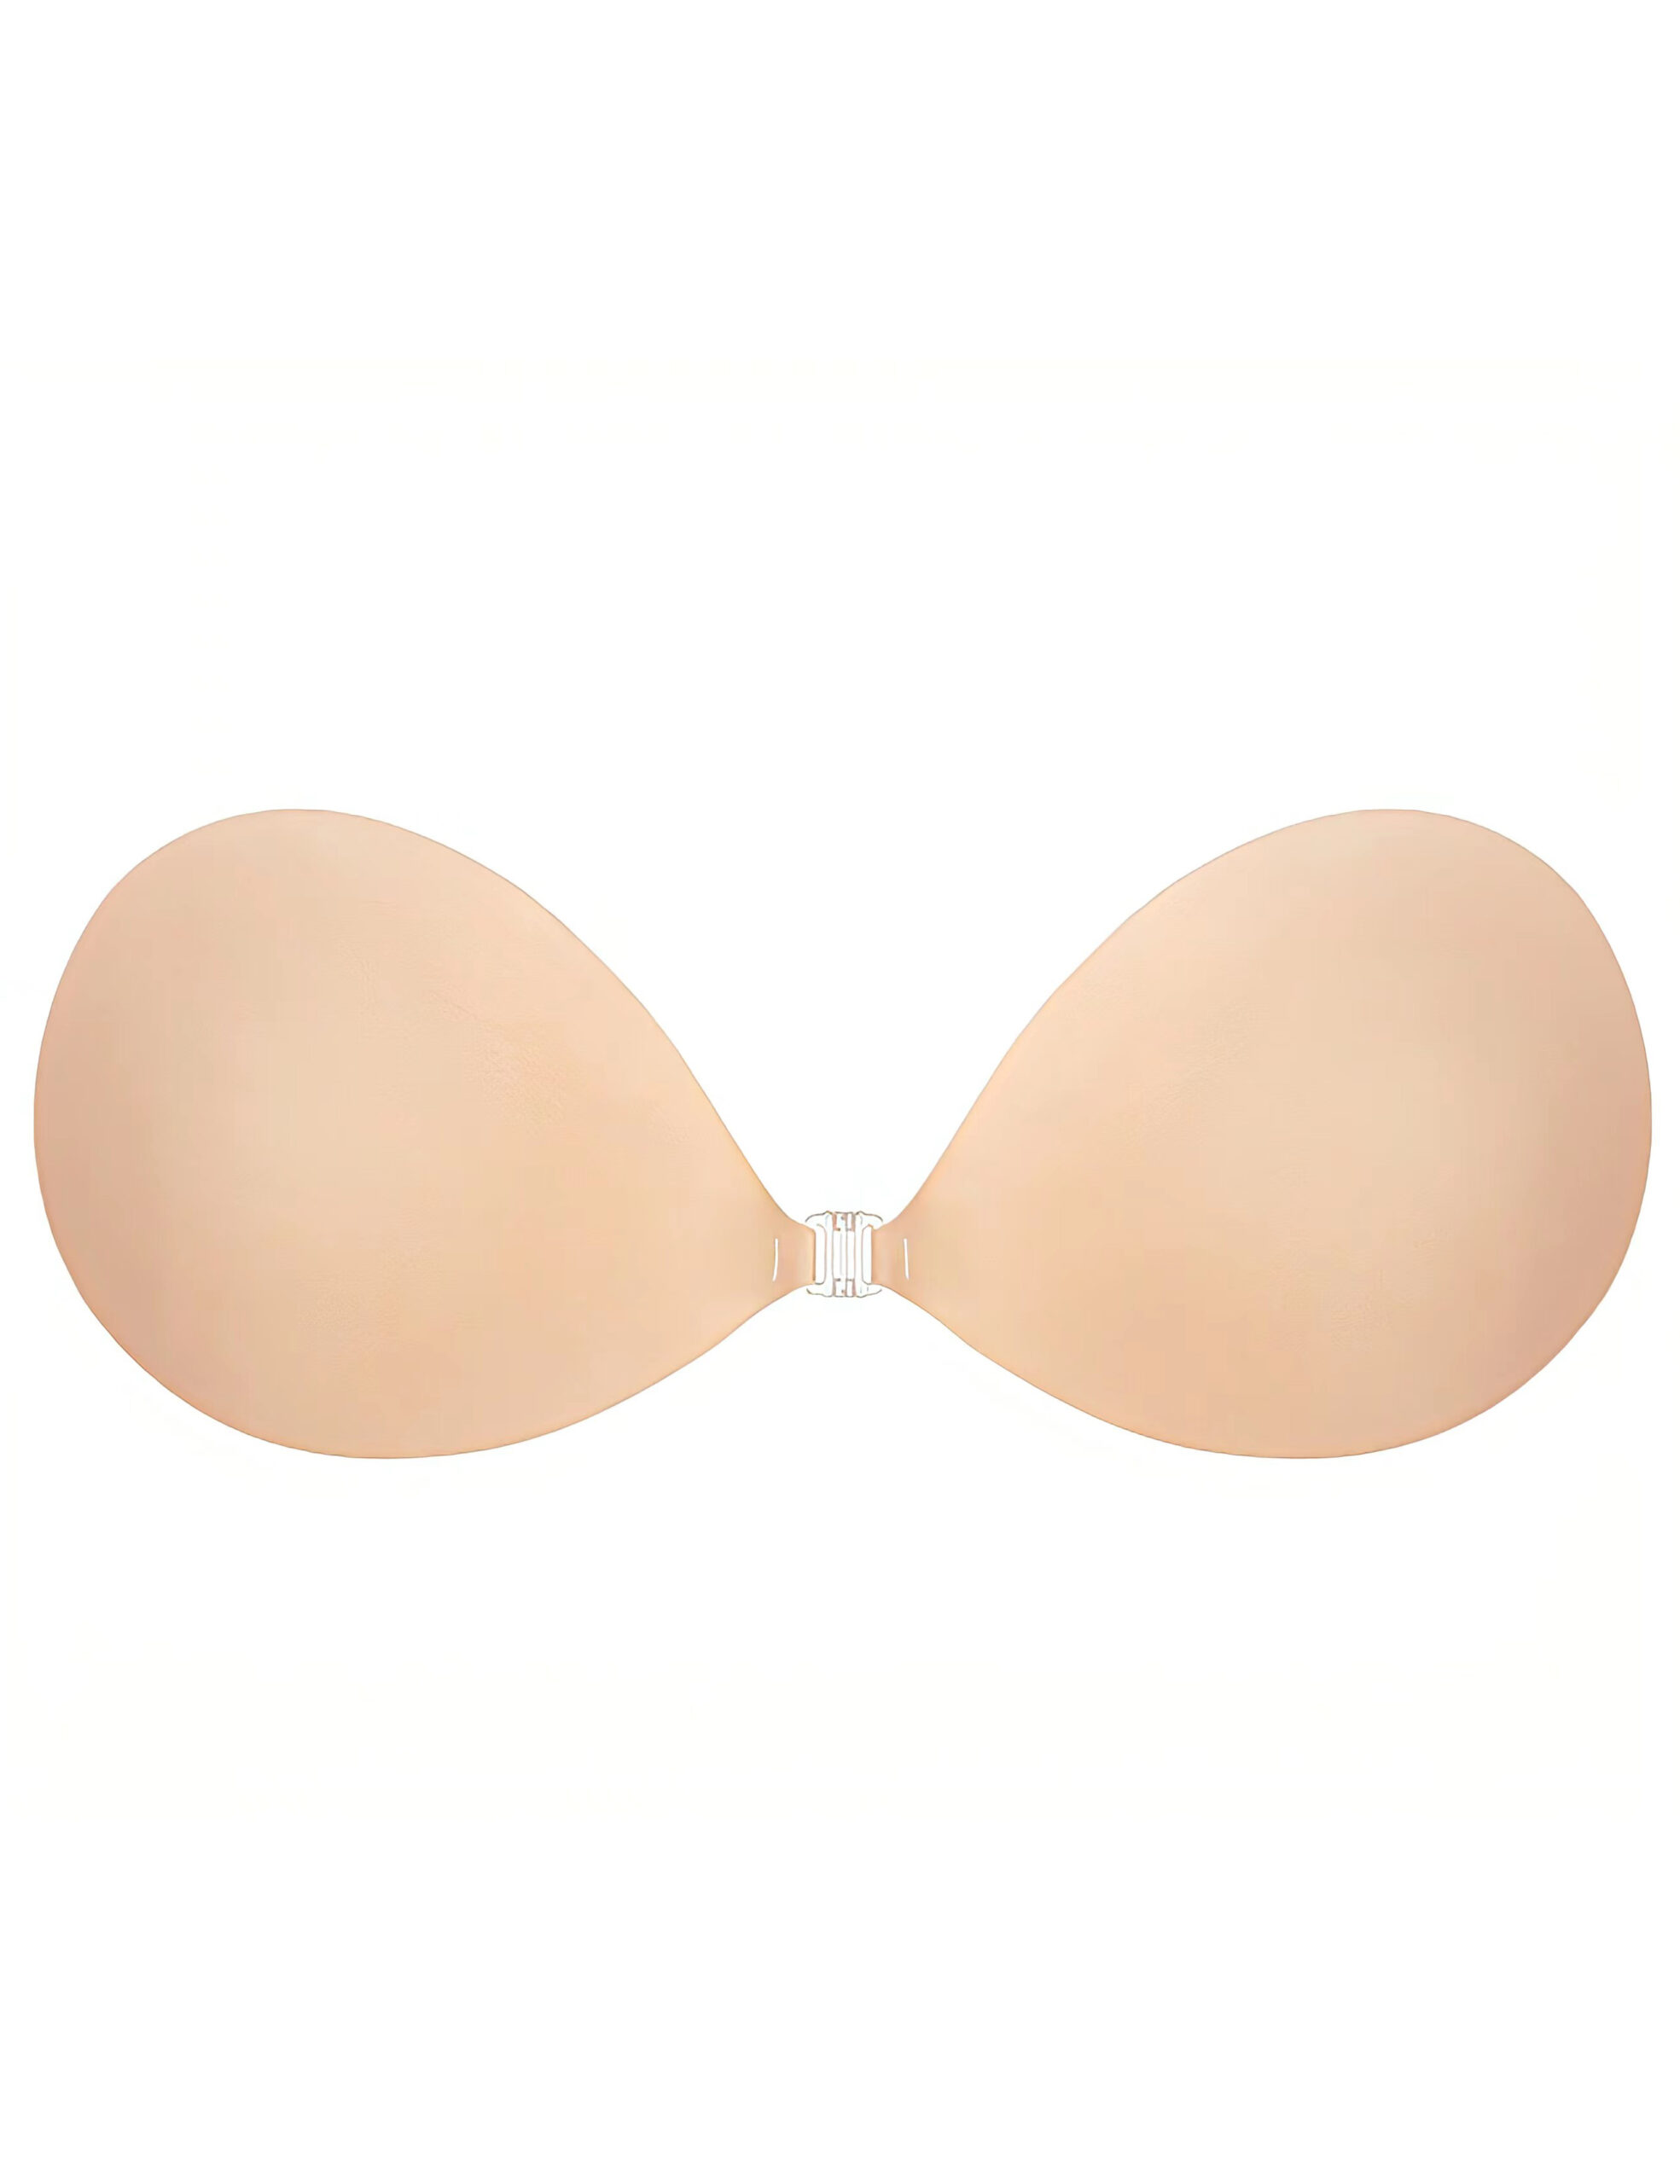 Invisible Adhesive Bra Backless Strapless Deep Plunge Stick On Bra